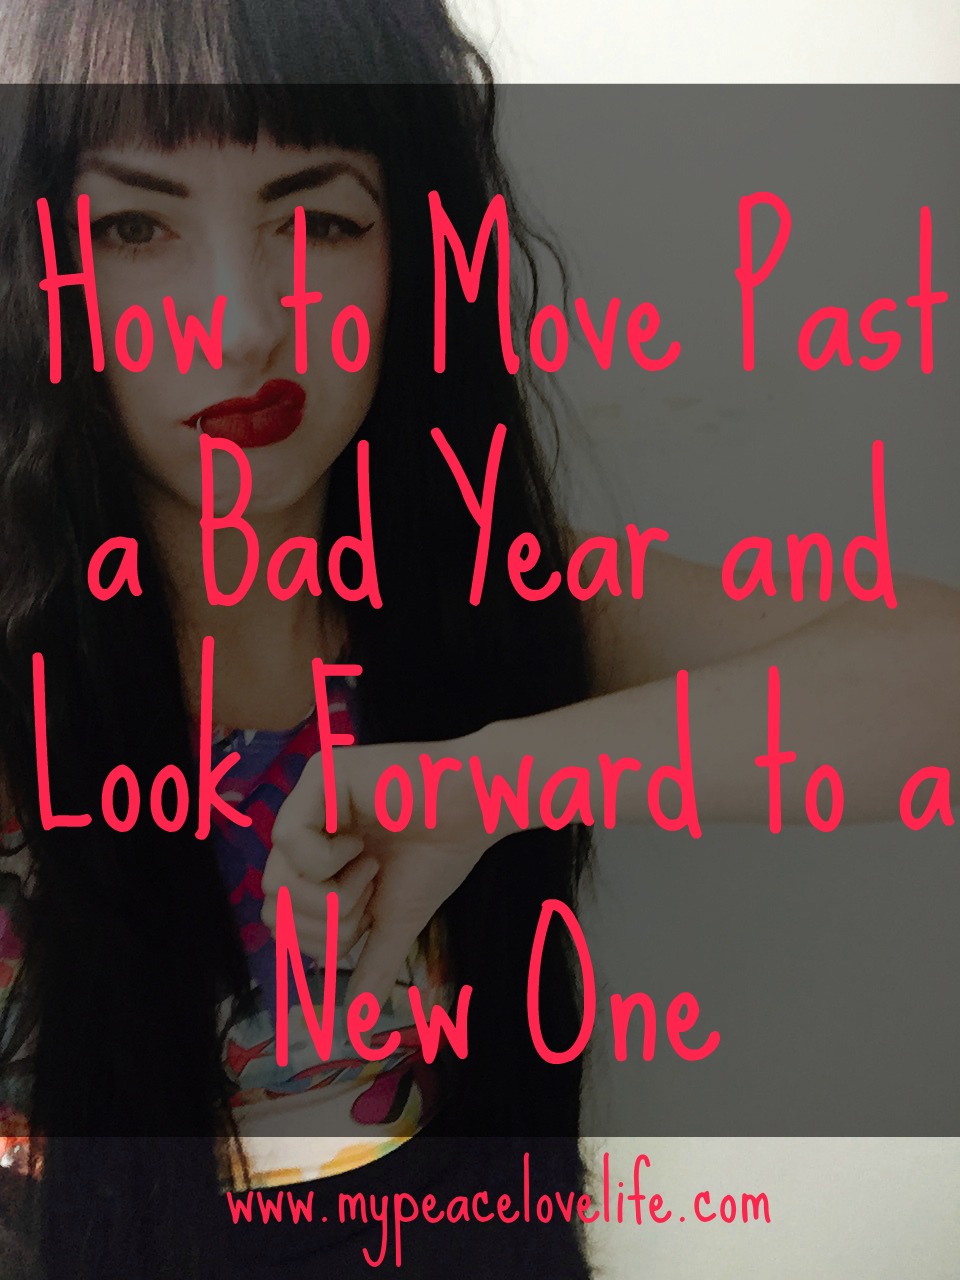 How to Move Past a Bad Year and Look Forward to a New One